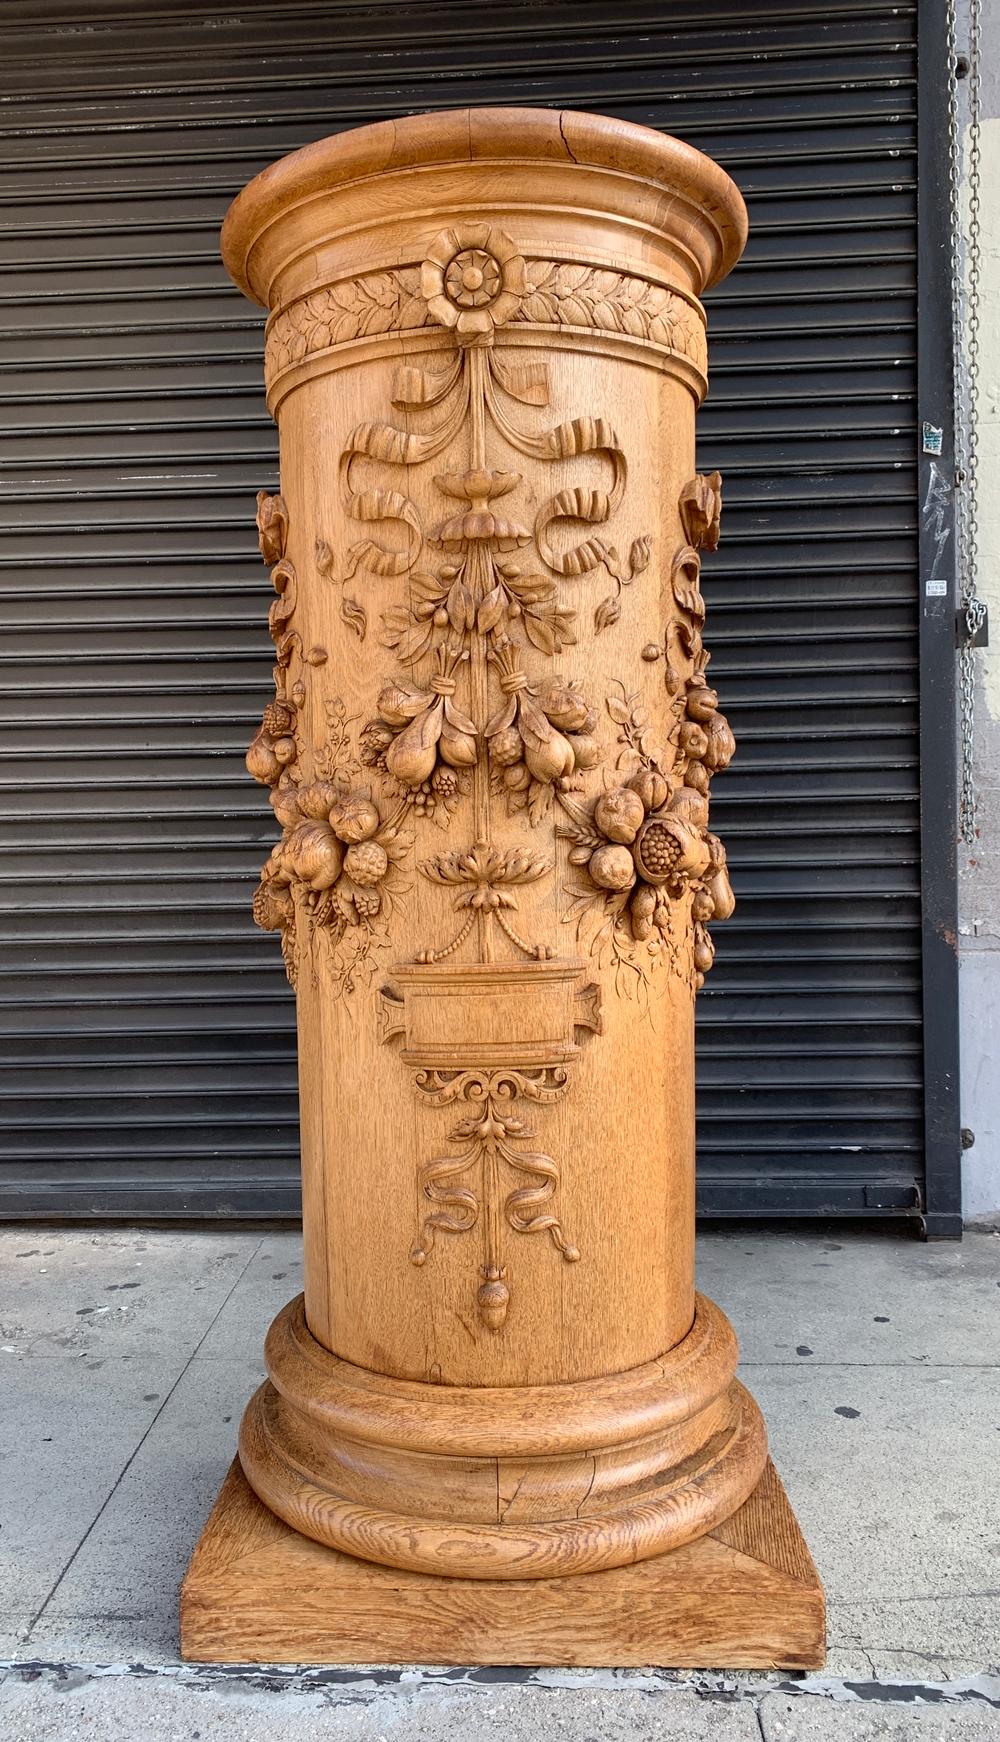 Stunningly beautiful is this carved pedestal hand made in France in the mid 1800's by Master sculptor and artist P.Mazaroz R.

The piece is heavily carved having flowers, fruits and vegetables along with some ribbons and scrolls.

The piece is